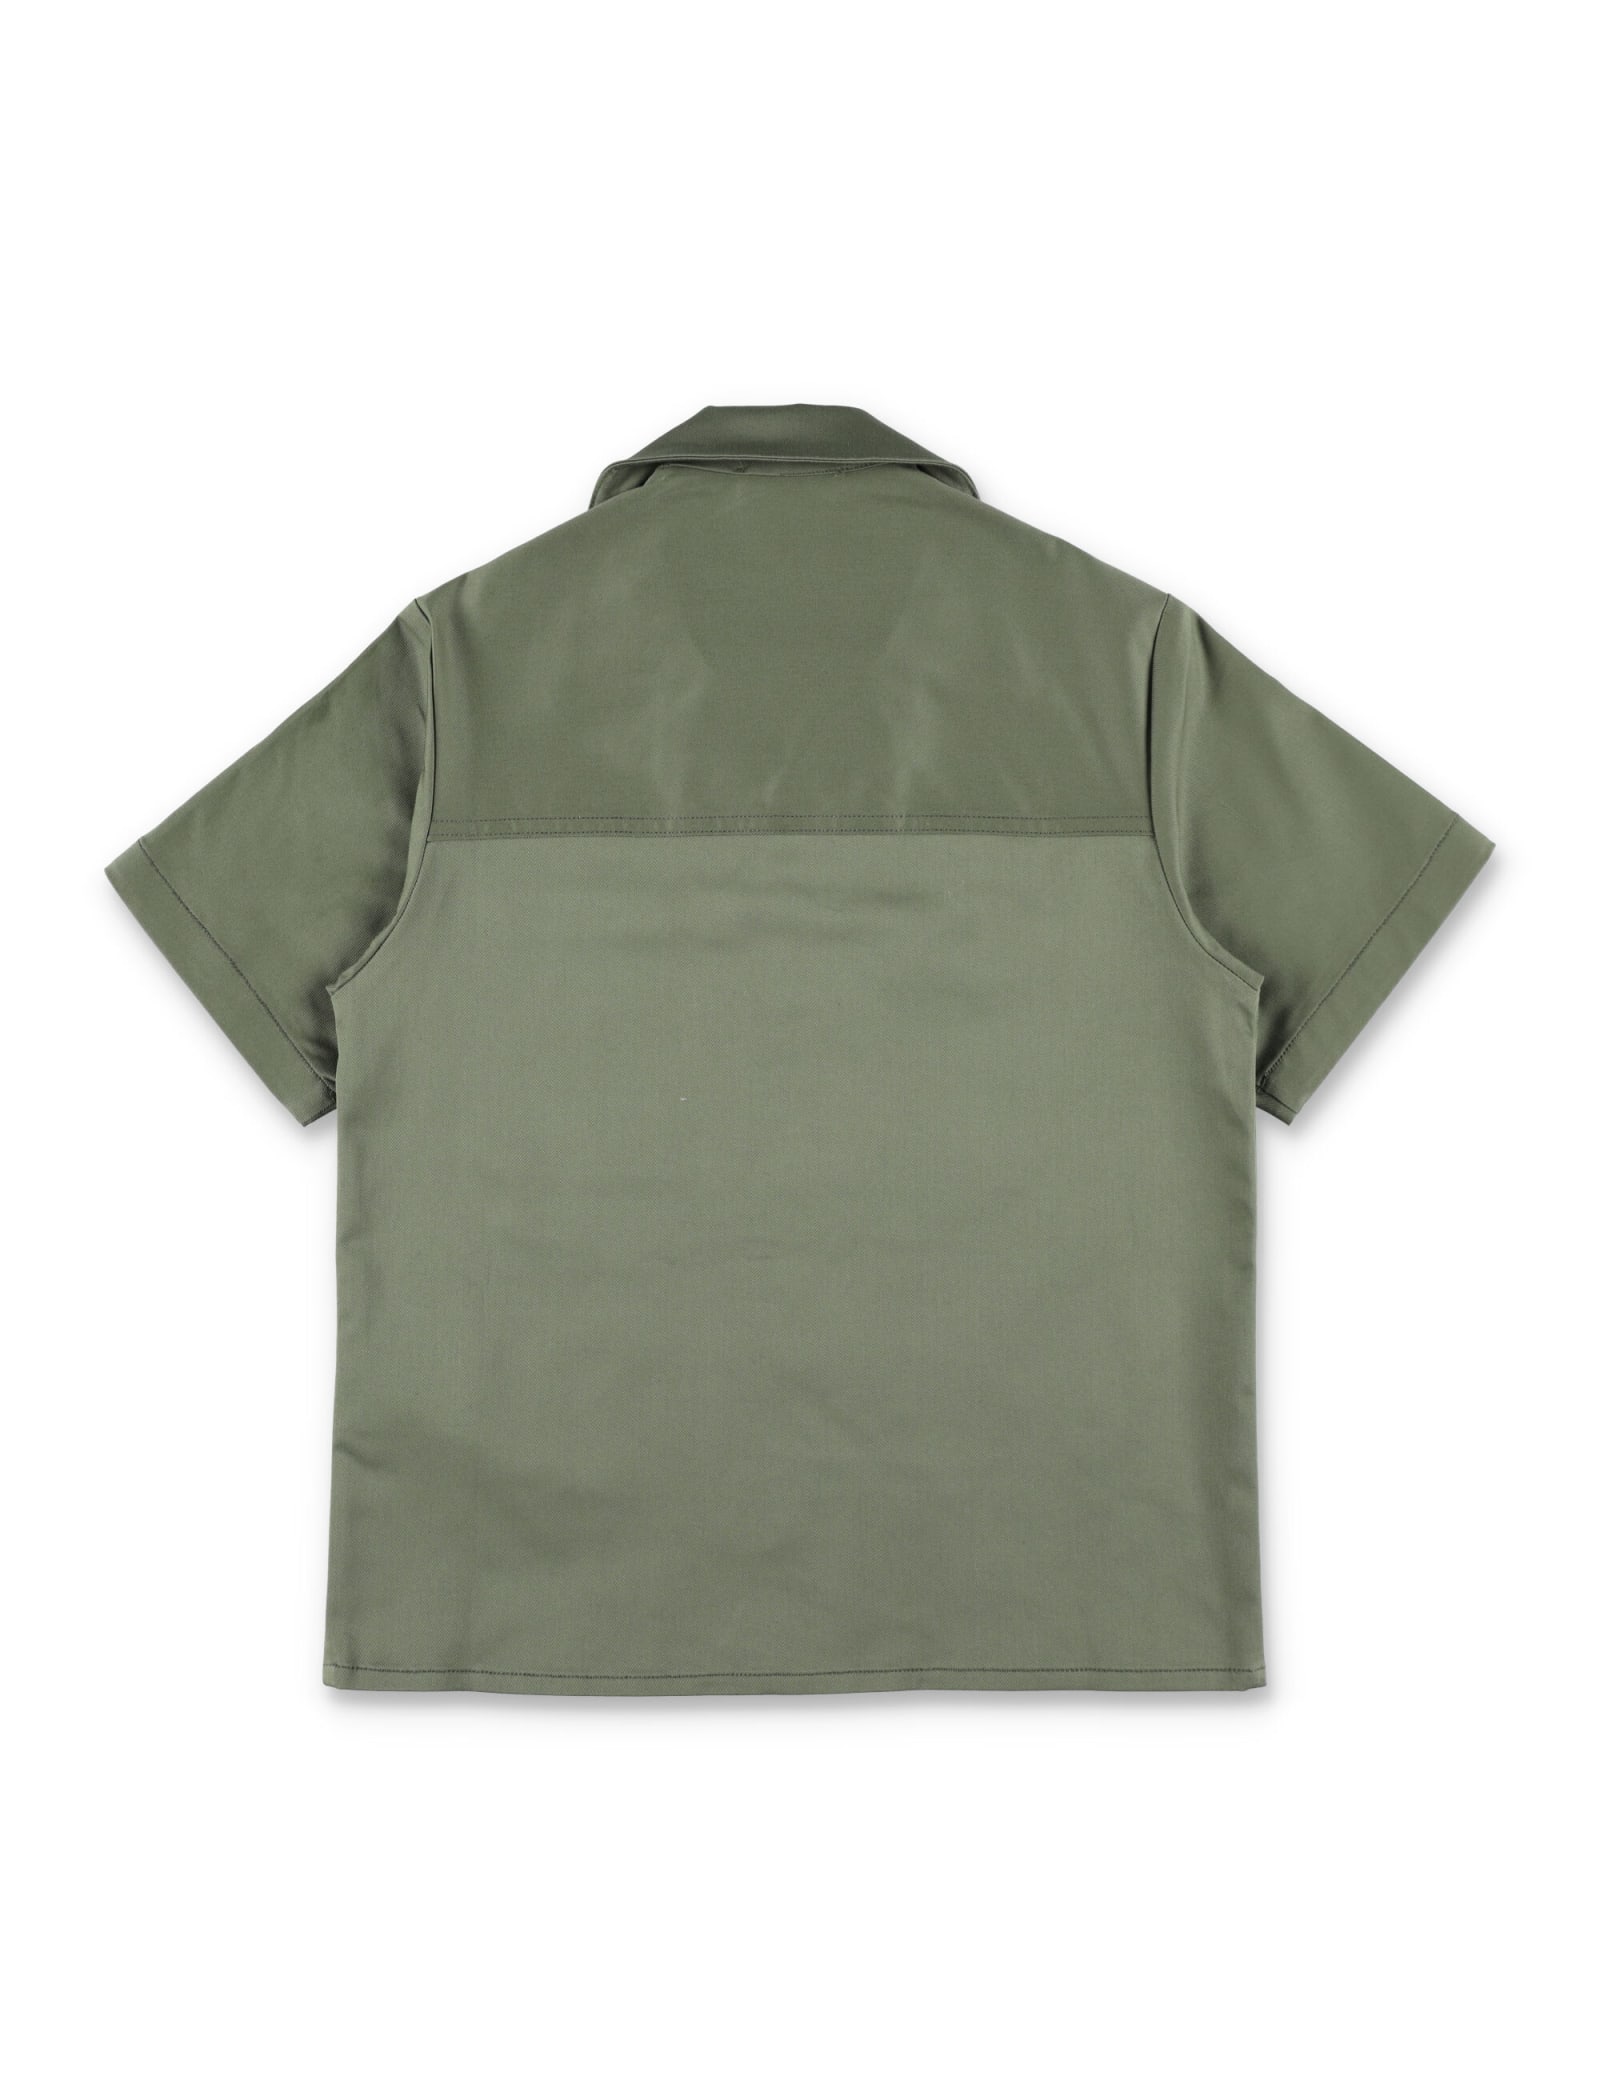 Shop Golden Goose Boxy Fit Shirt In Ivy Green